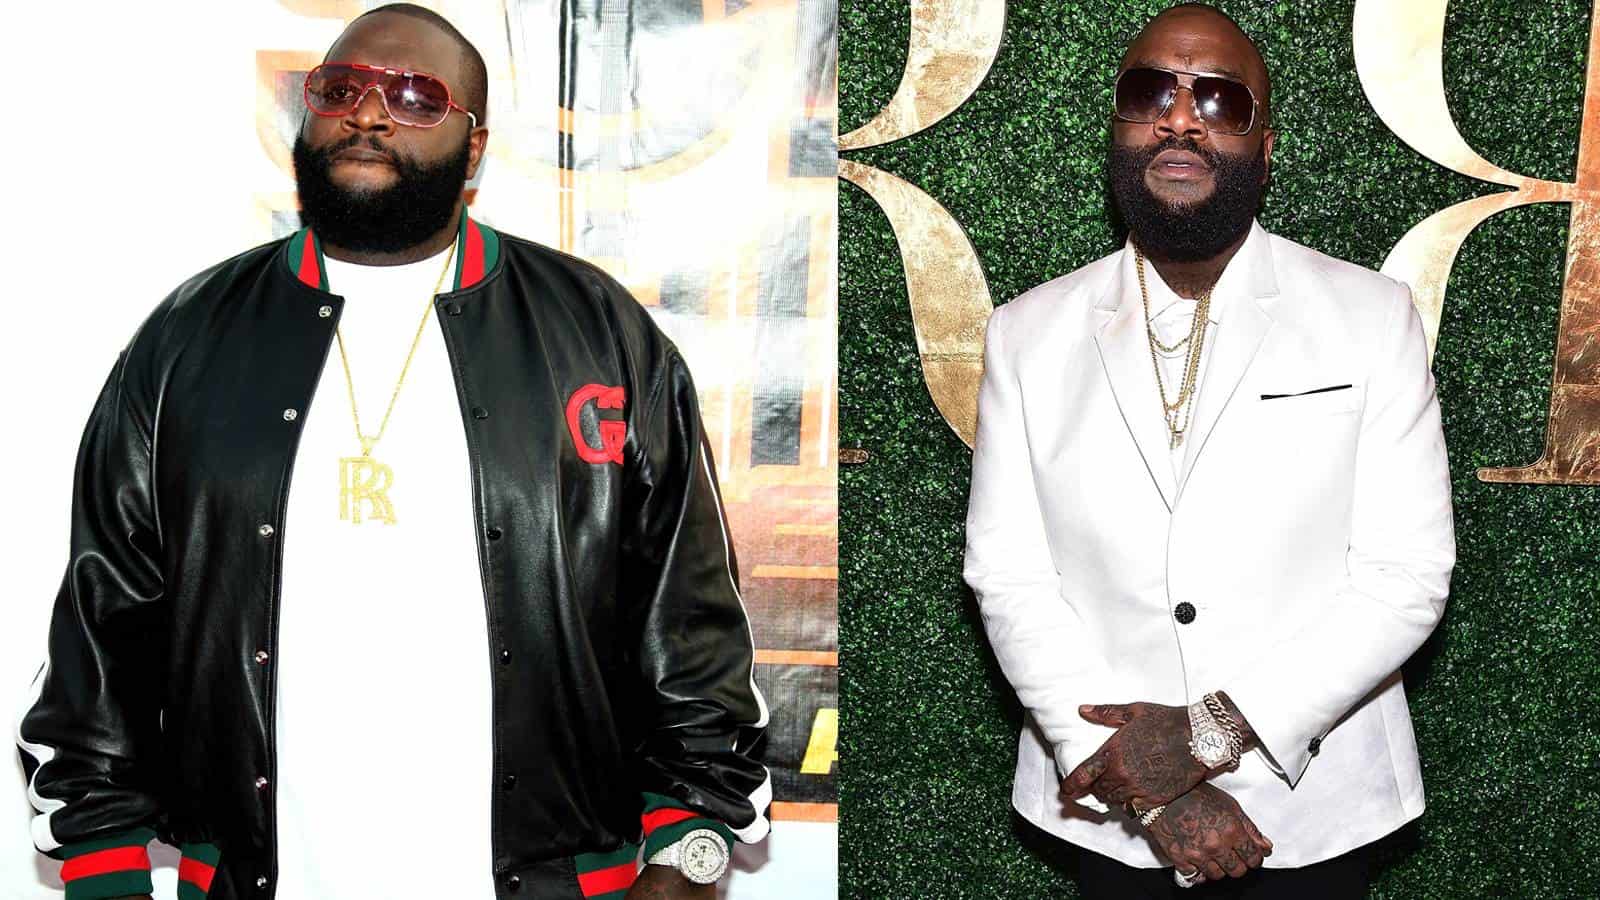 Rick Ross Before And After: How the Rapper Has Transformed - OtakuKart